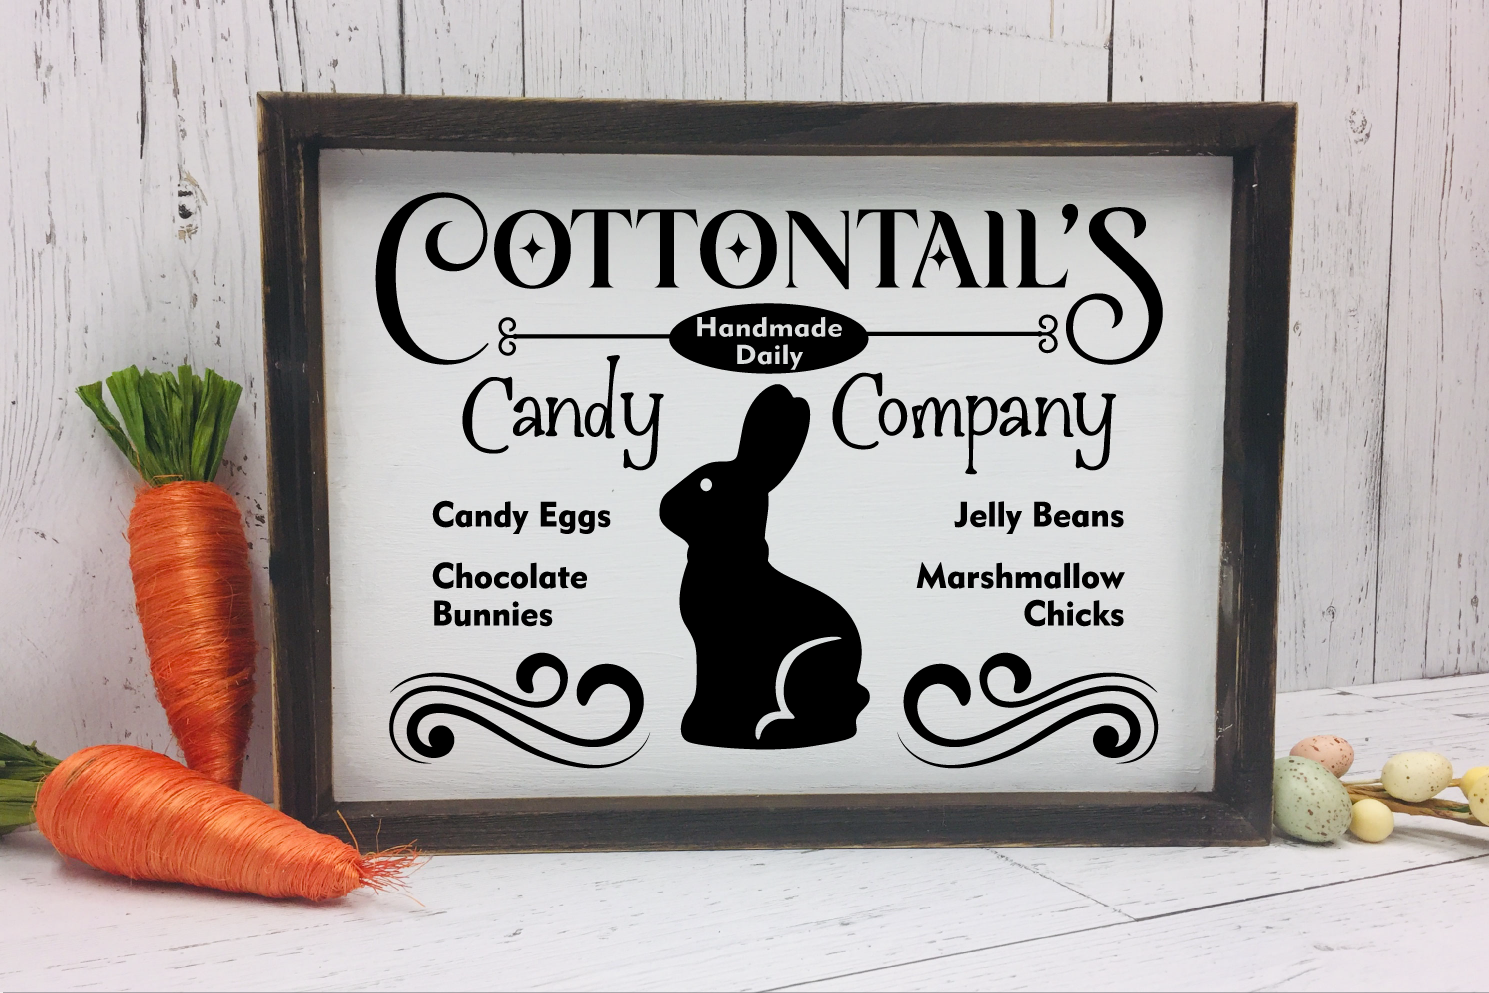 Cottontail Candy Co. Vintage Sign SVG For Easter | Cricut/Silhouette - Commercial Use SVG Files for Cricut & Silhouette